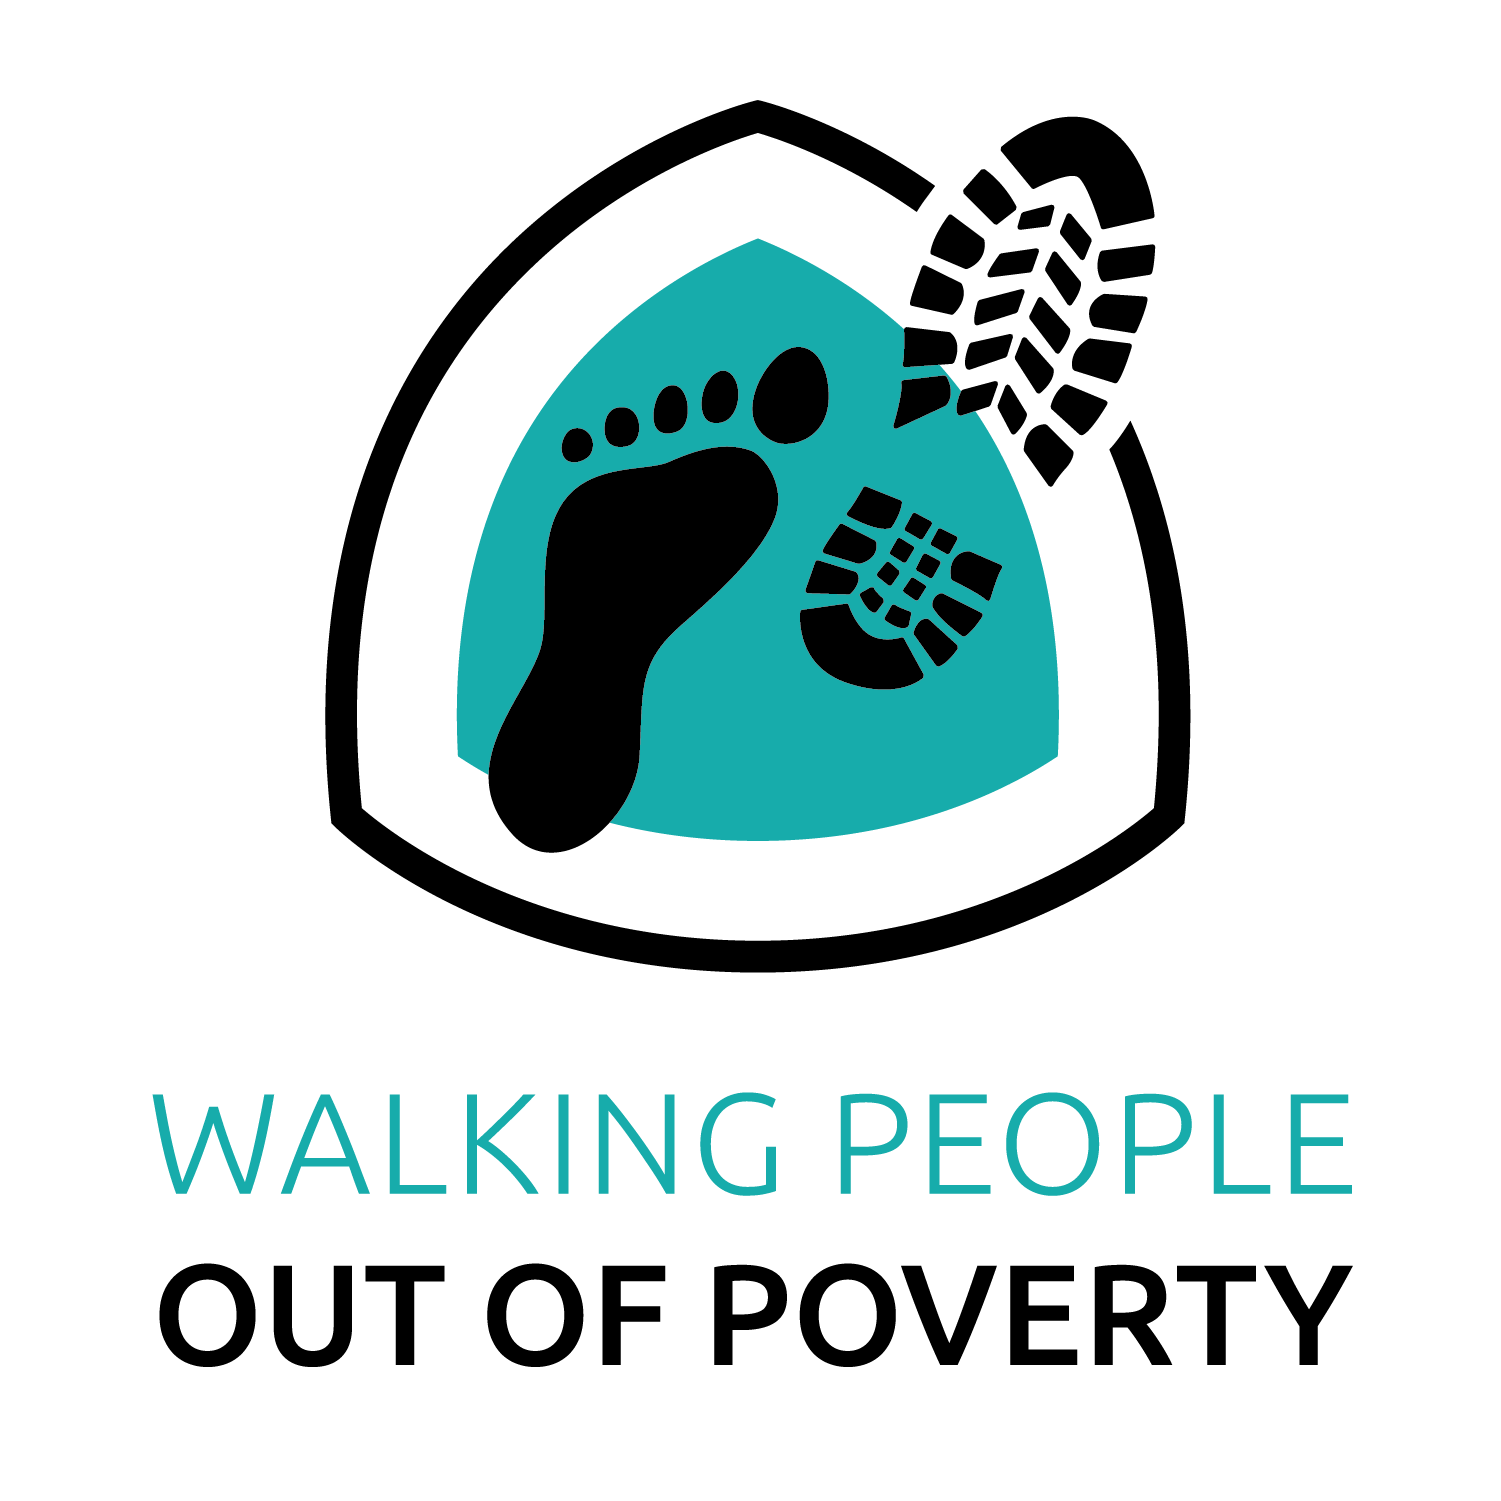 Walking People Out of Poverty